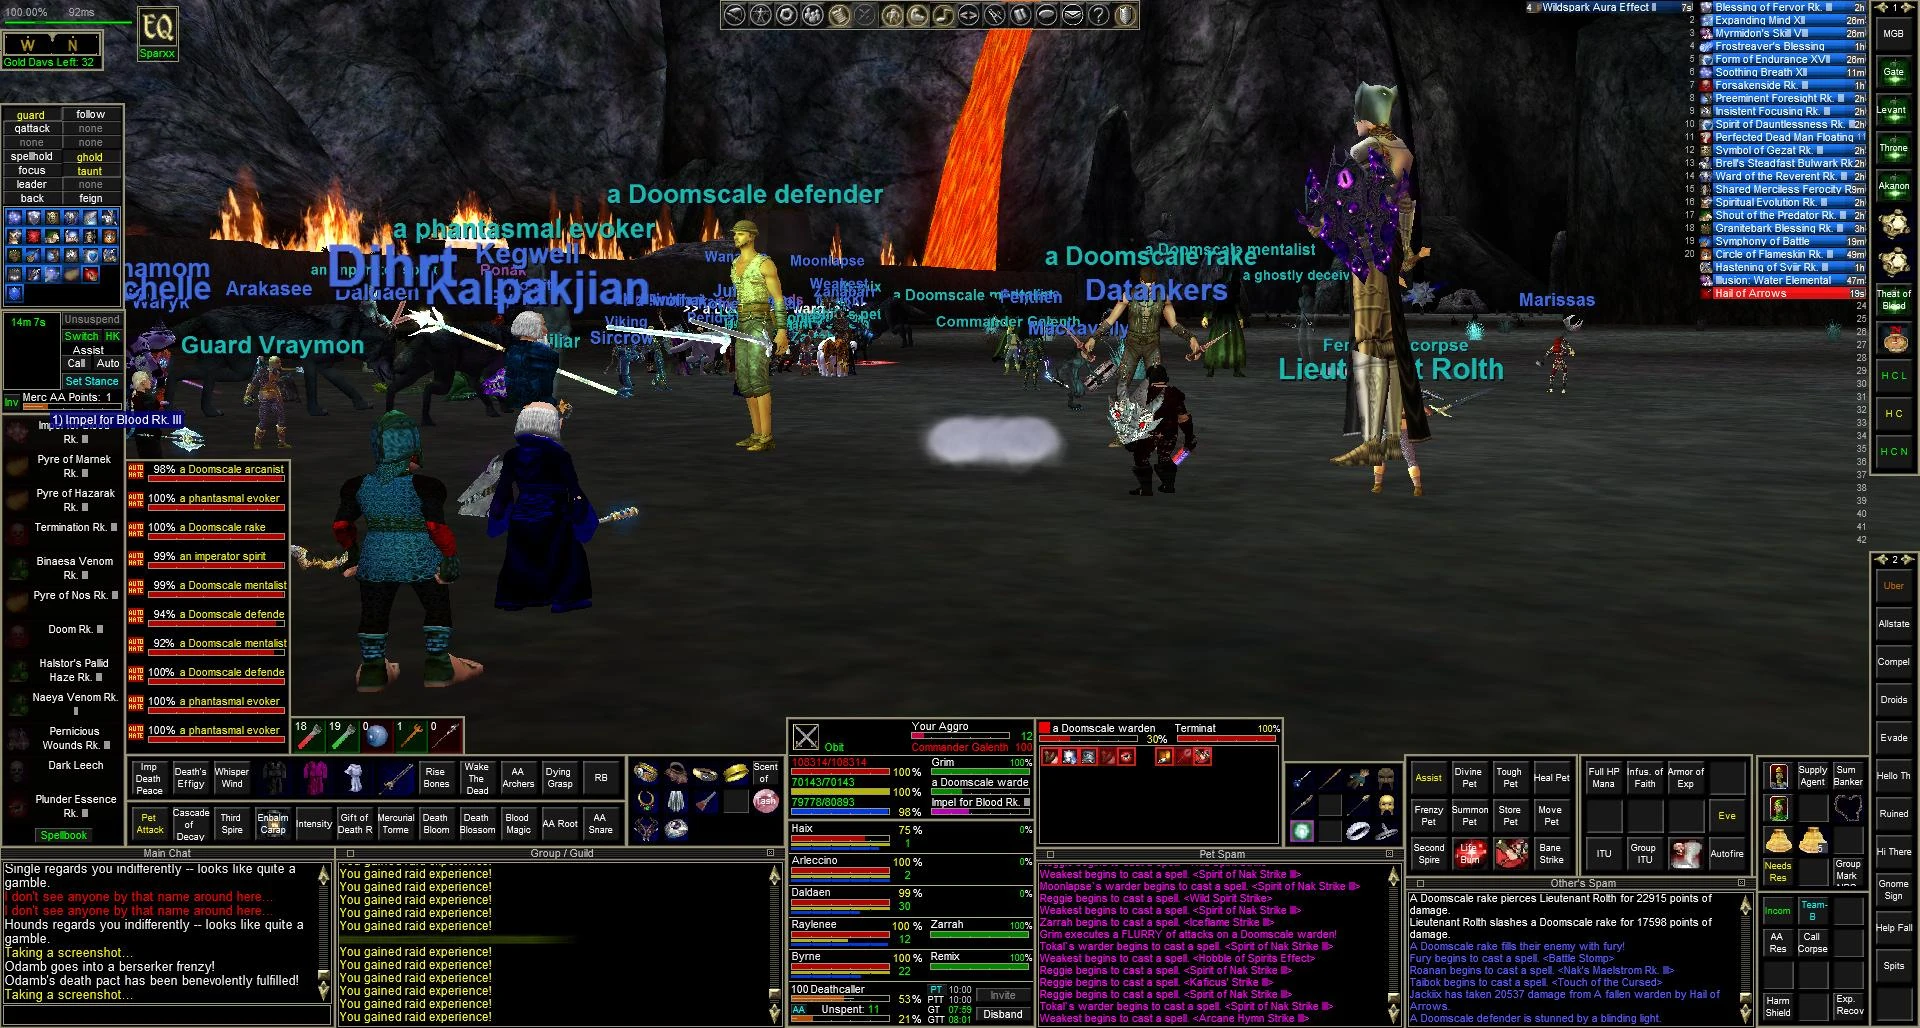 EverQuest Testing New UI Engine with Improved Features and Customization Options